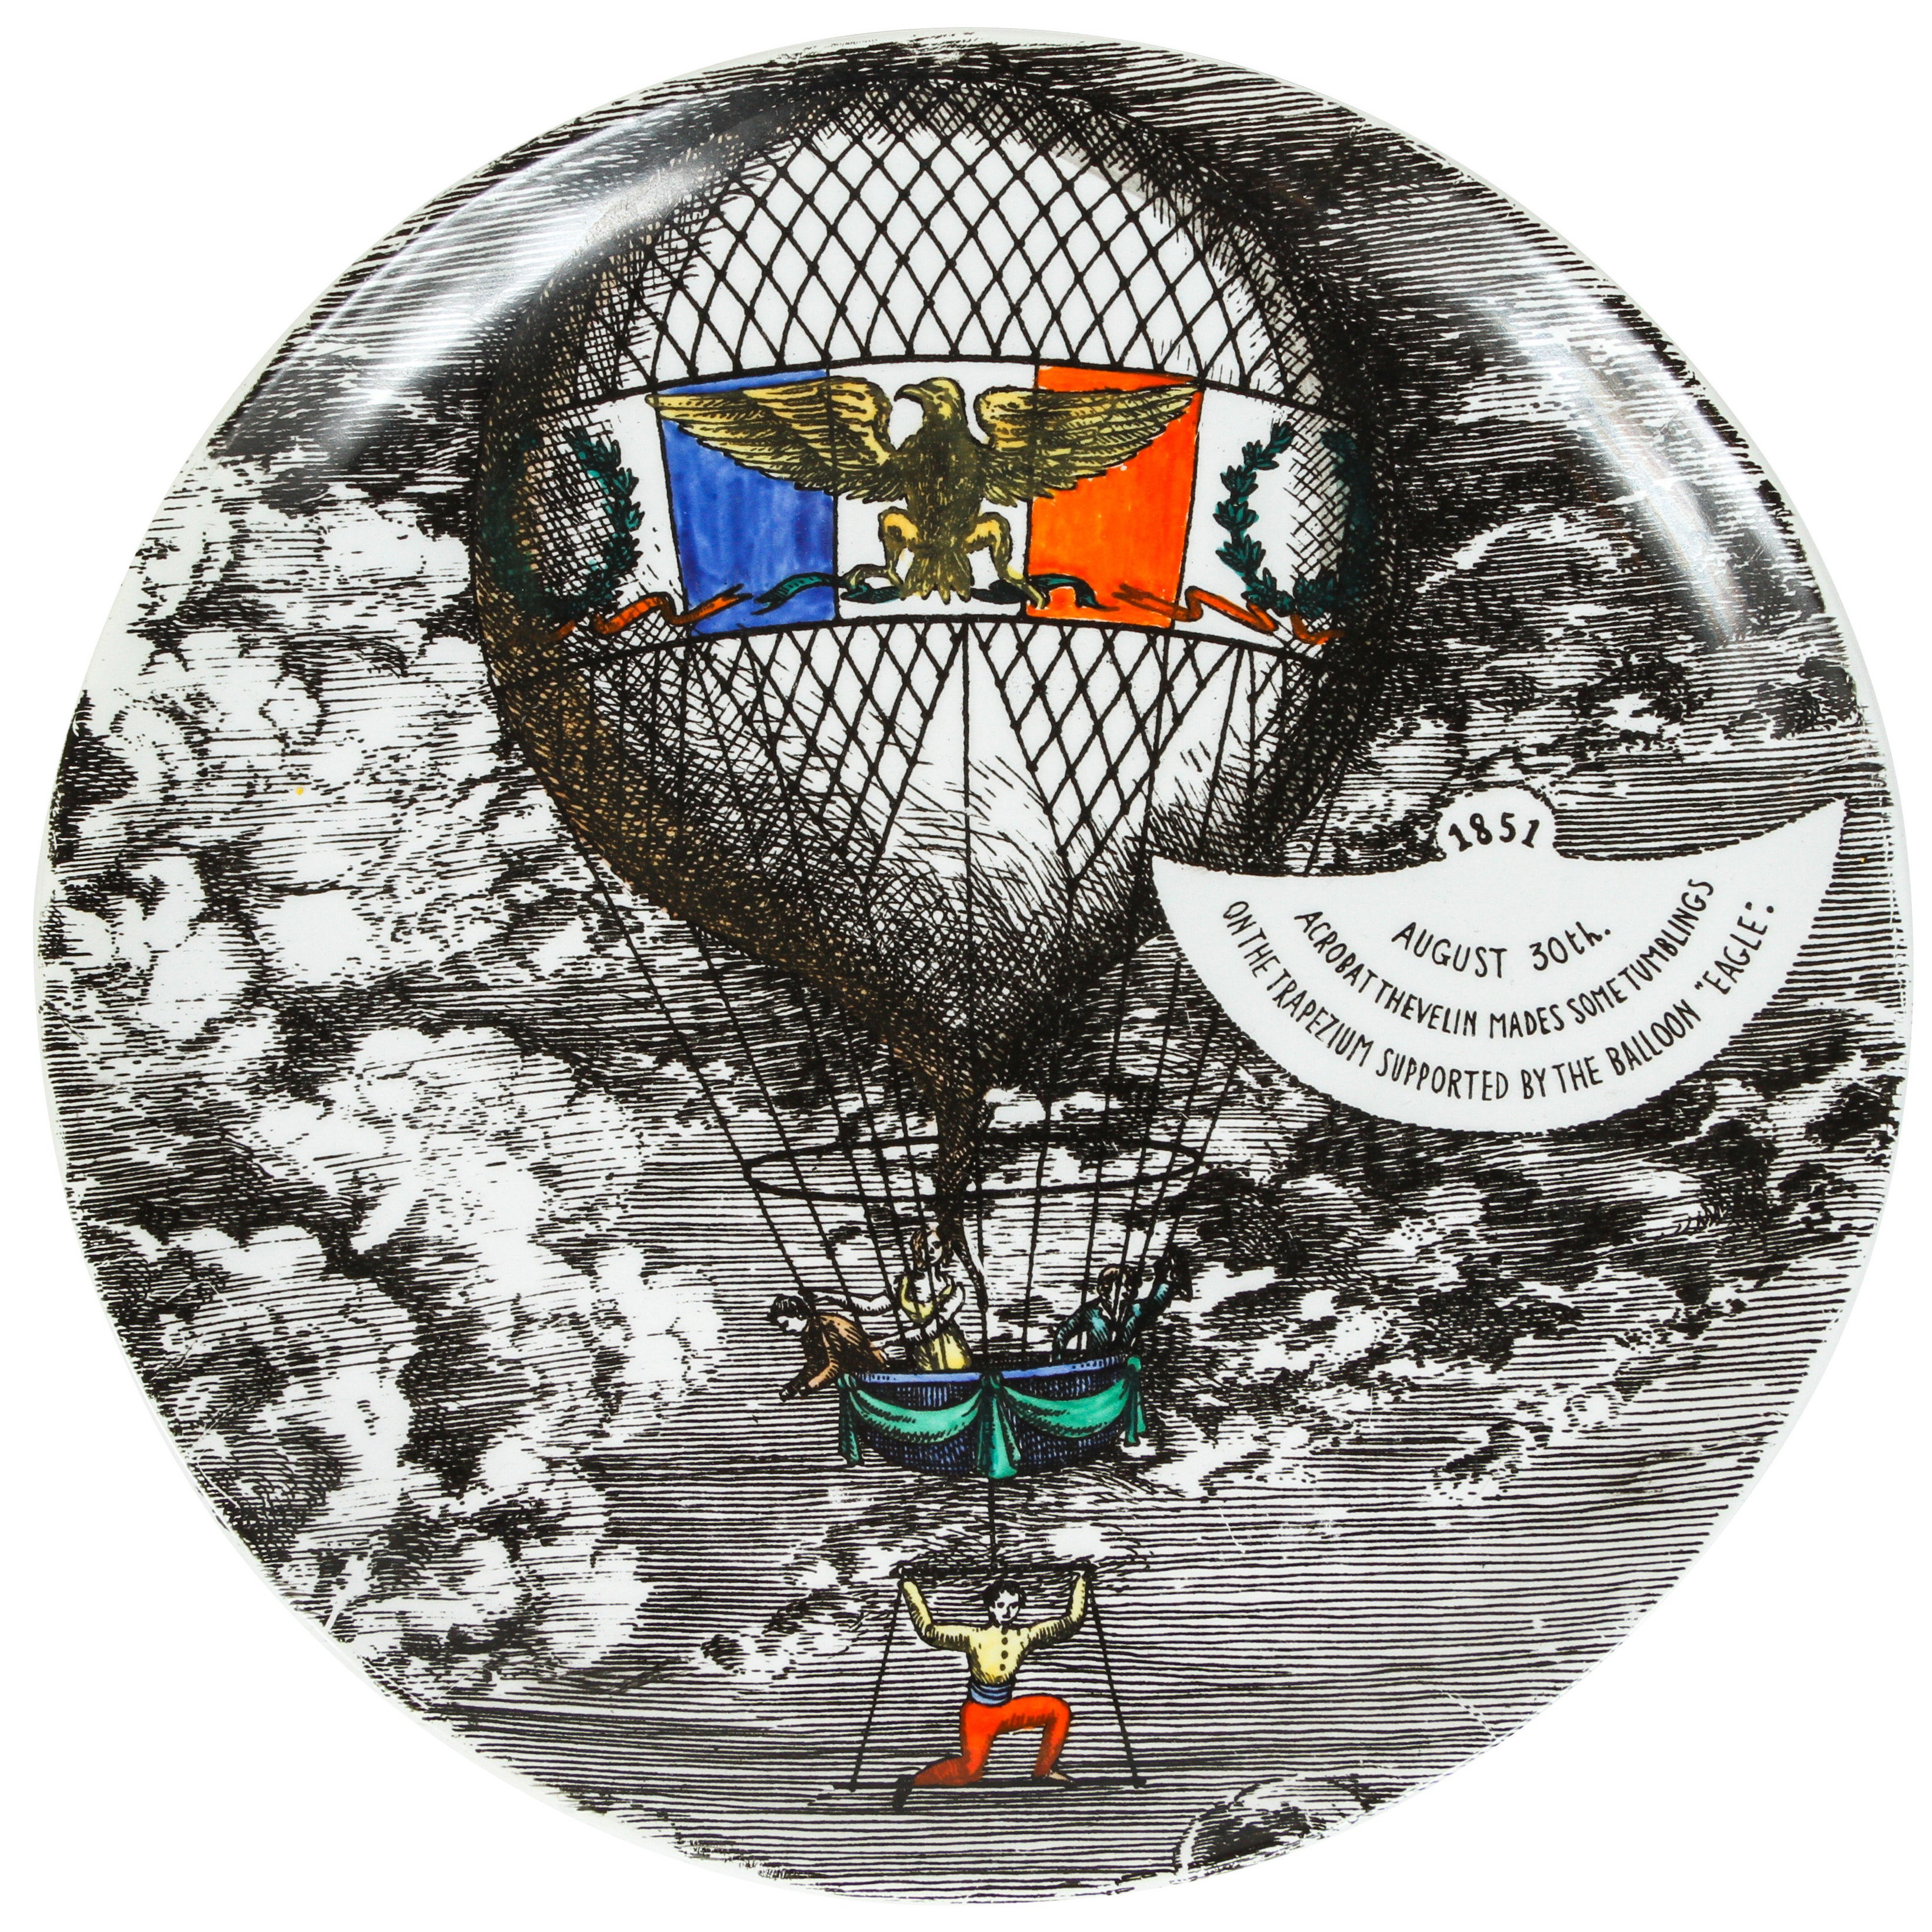 Hot Air Balloon Plate by Fornasetti